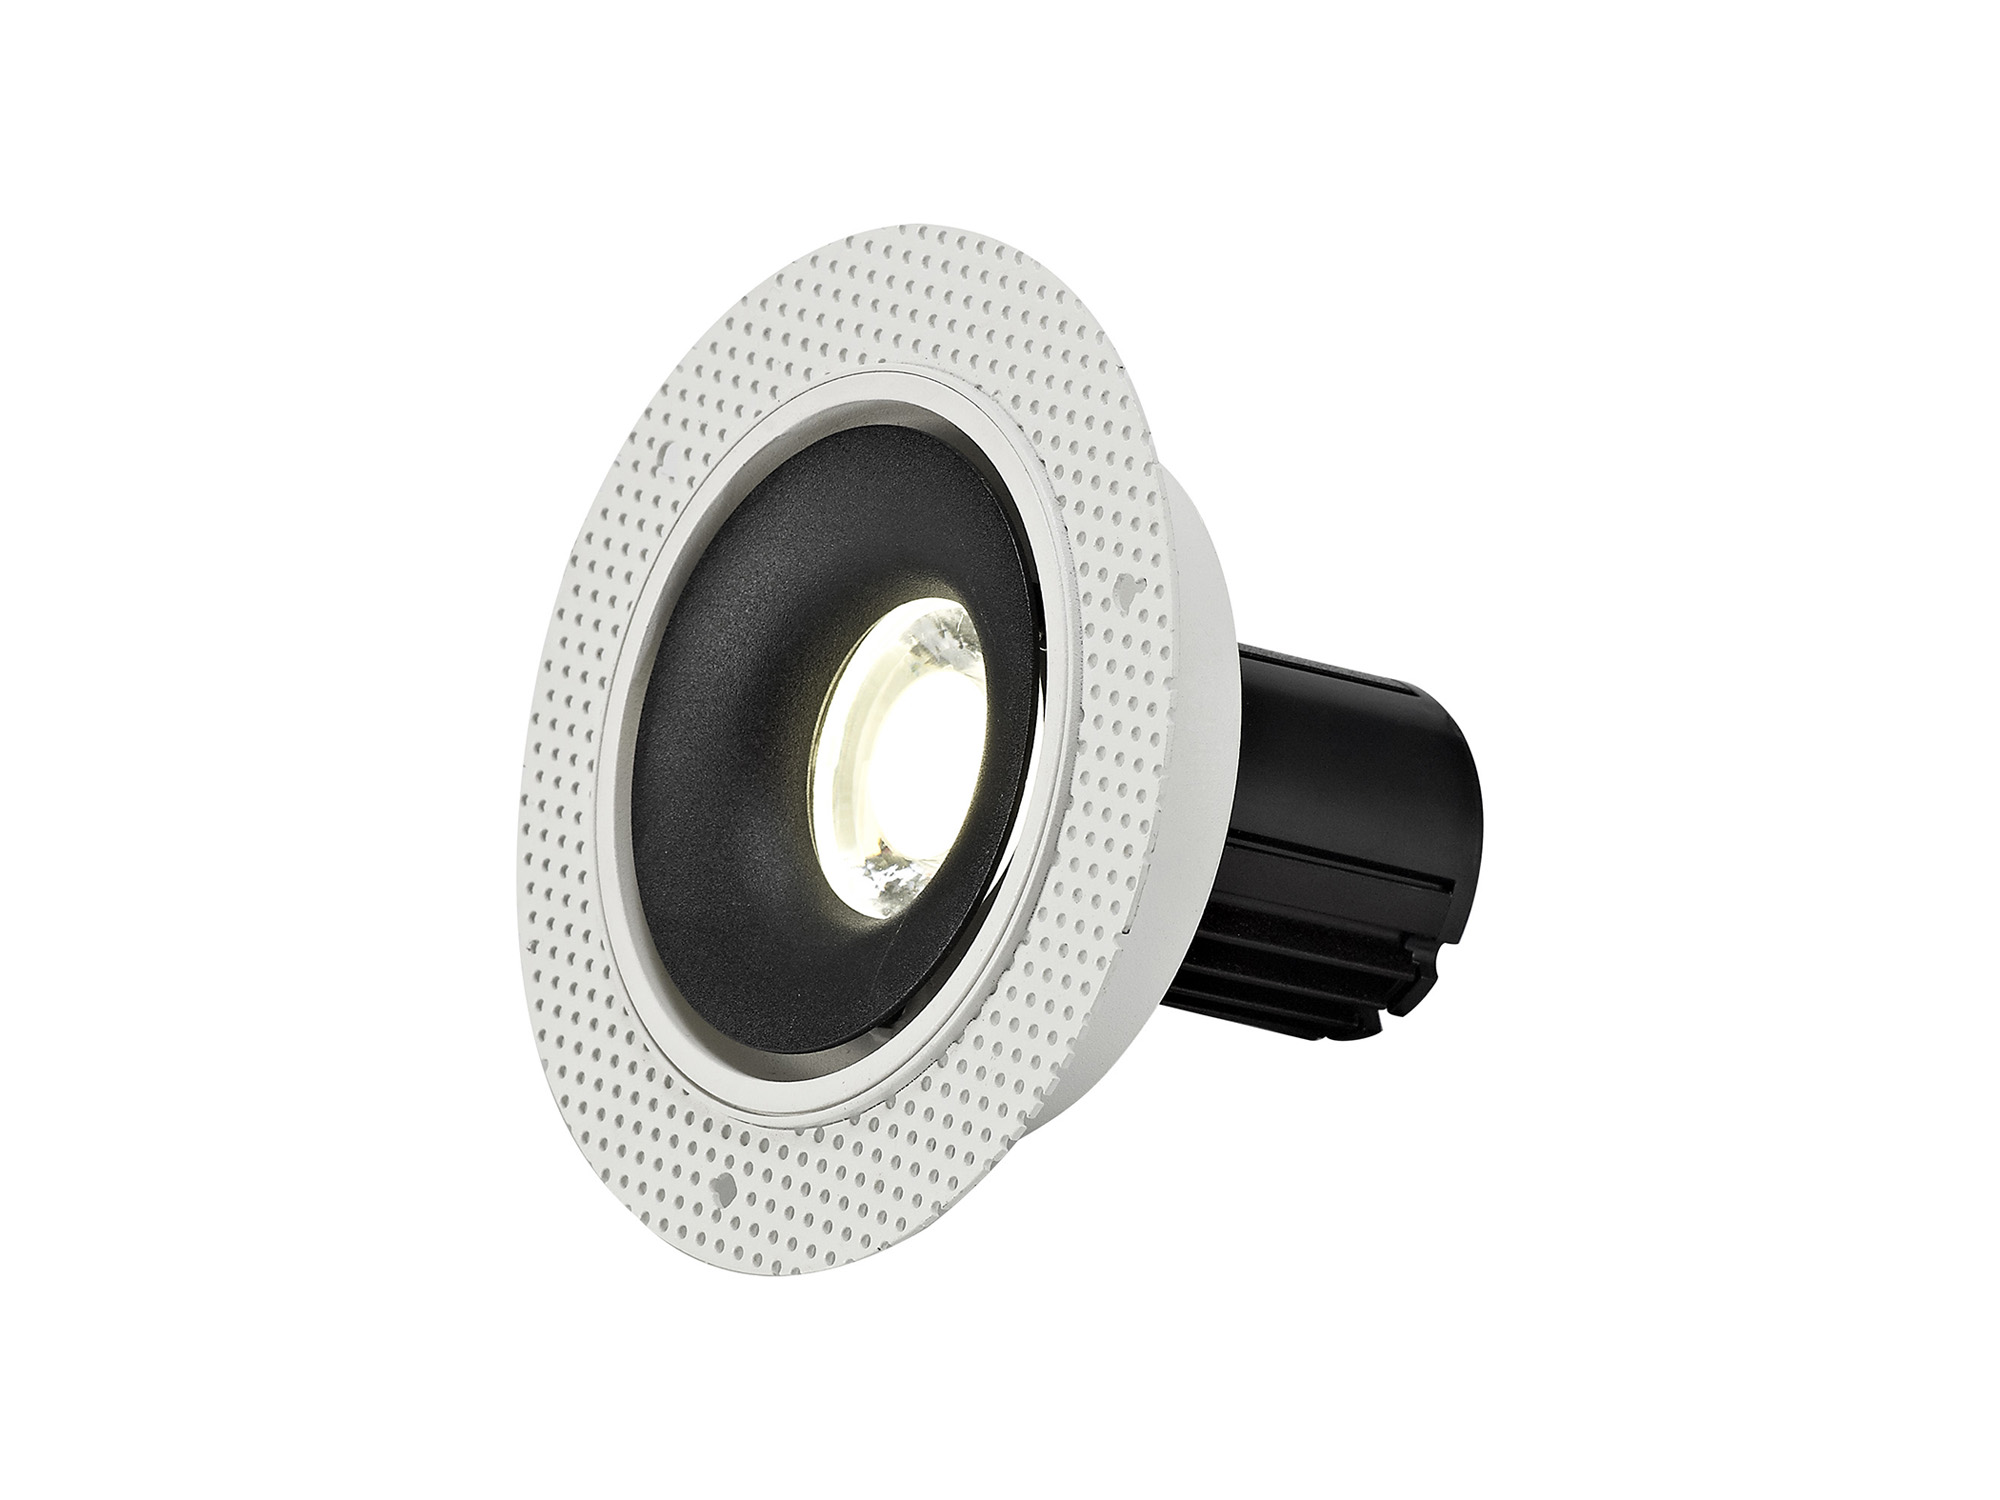 DM201096  Bolor T 10 Tridonic Powered 10W 4000K 810lm 36° CRI>90 LED Engine White/Black Trimless Fixed Recessed Spotlight; IP20